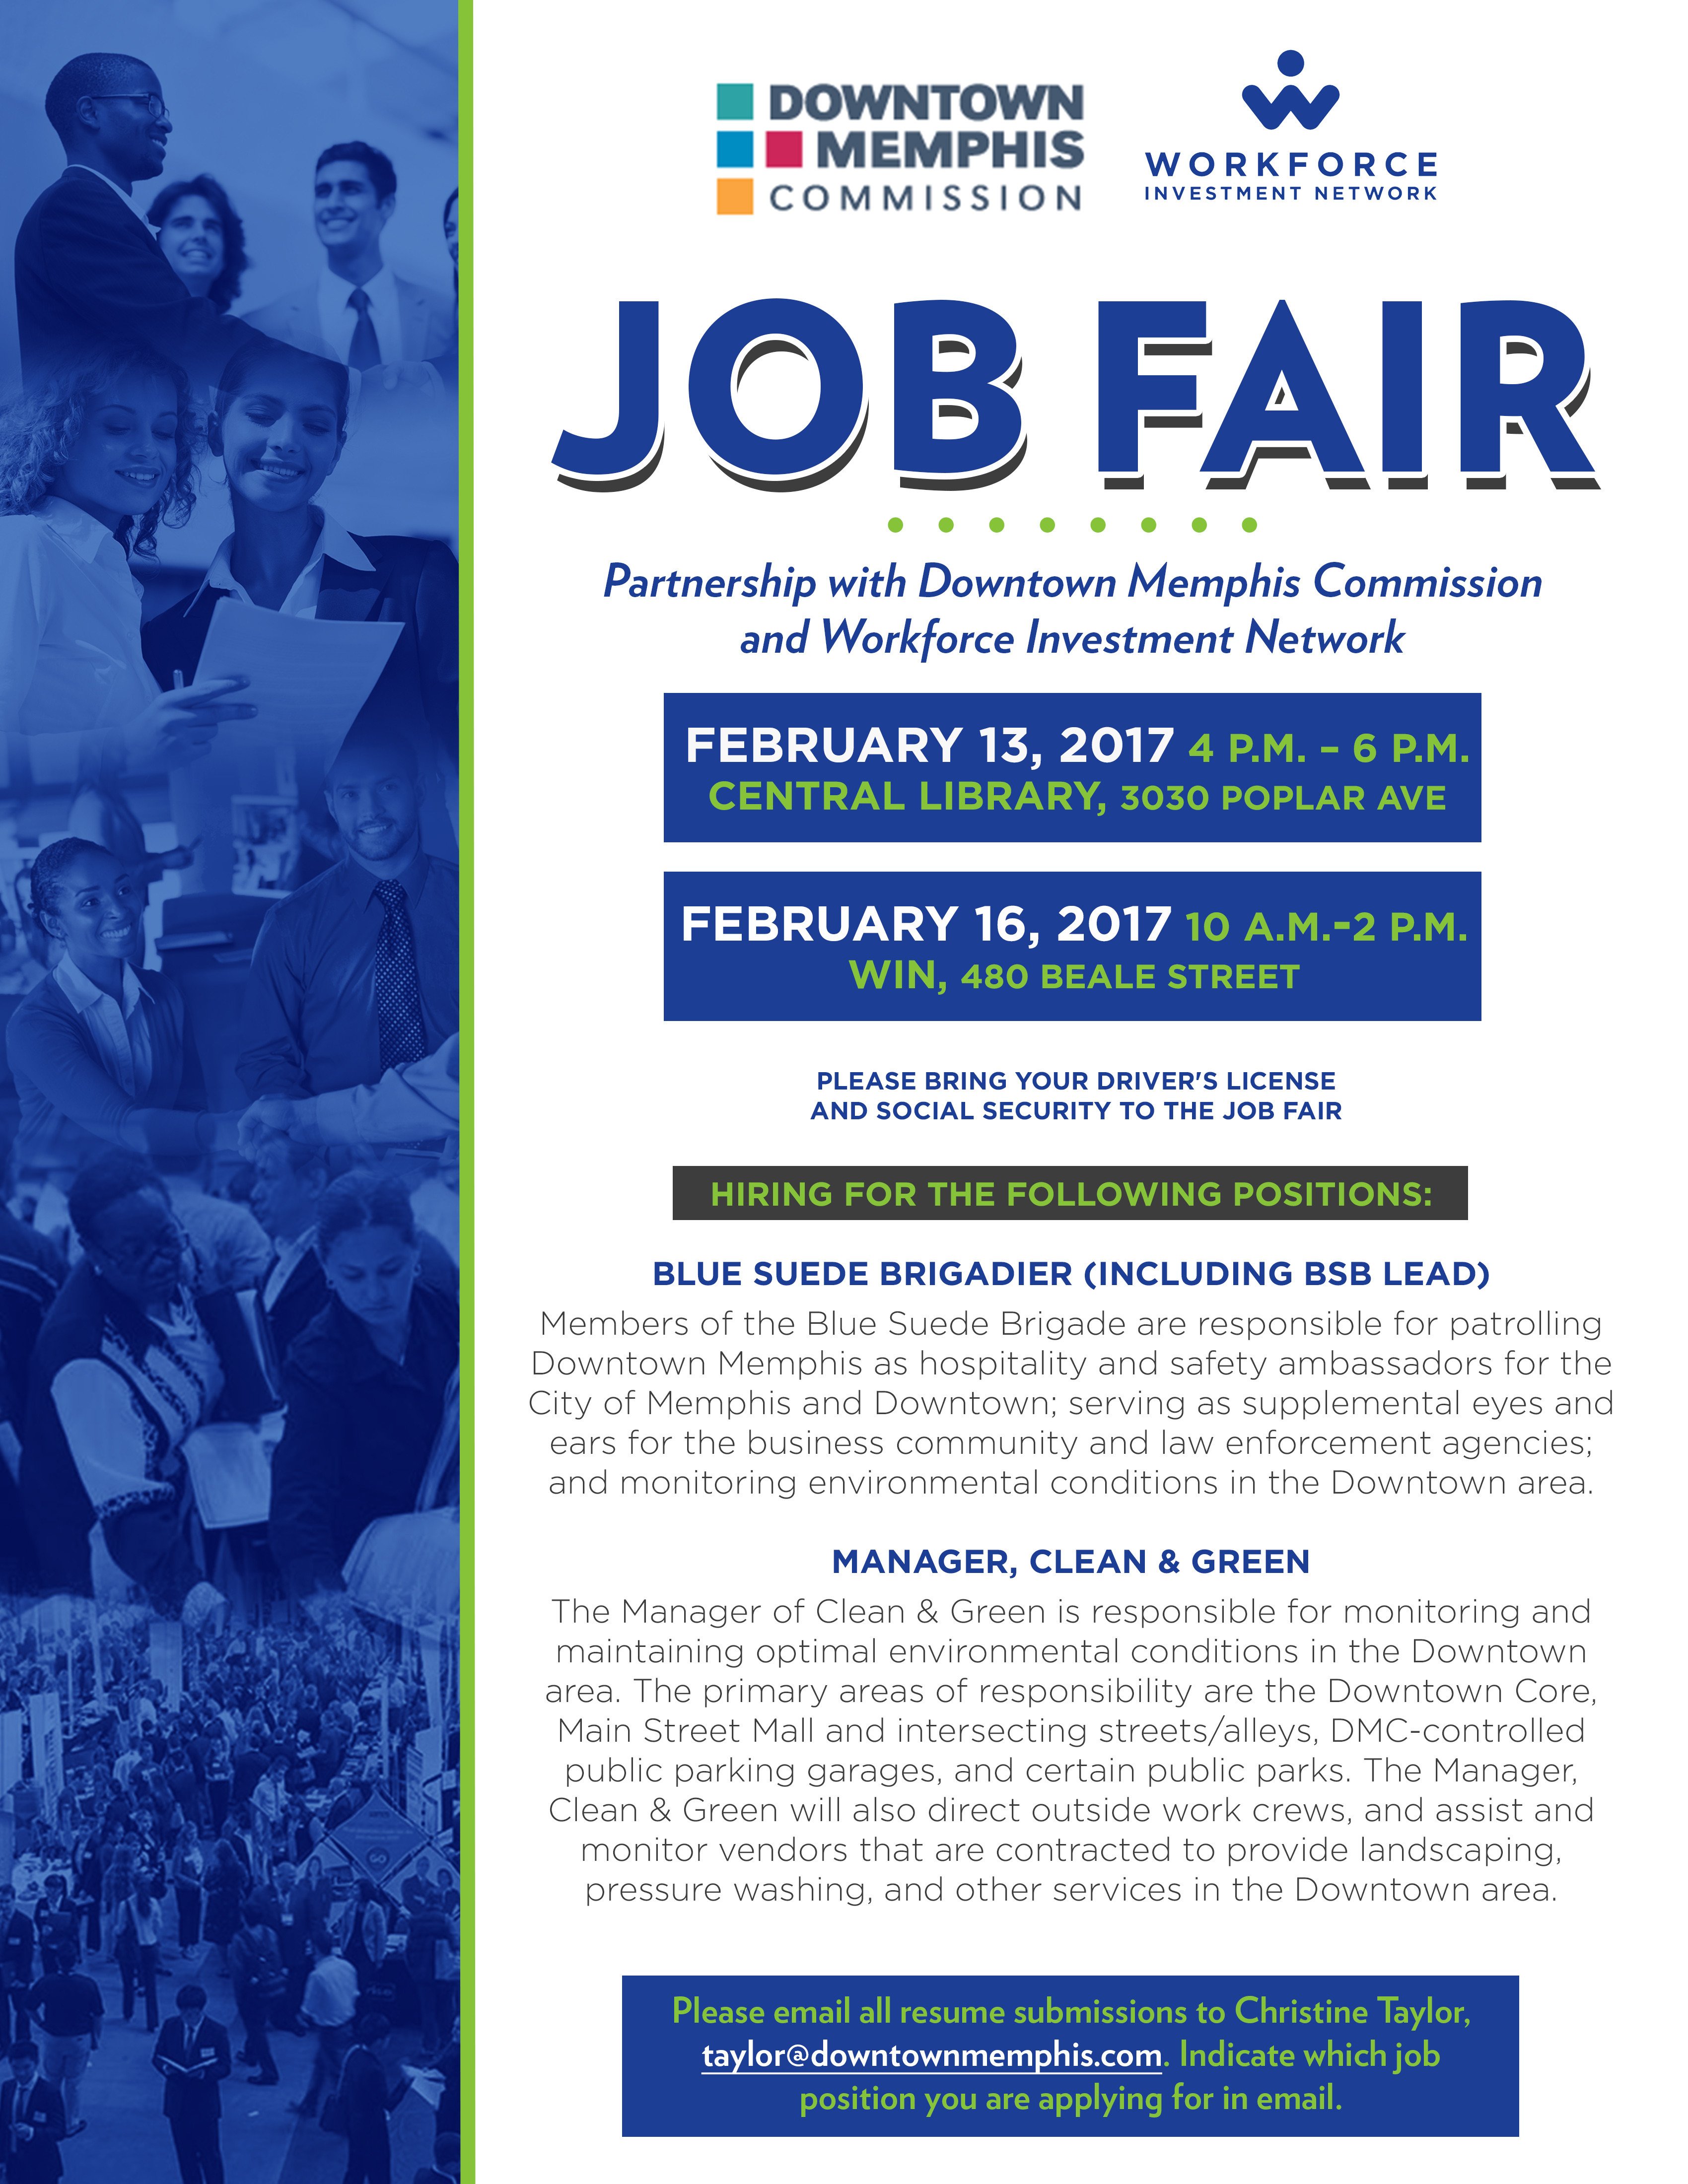 Job Fair Hosted By Downtown Memphis mission and